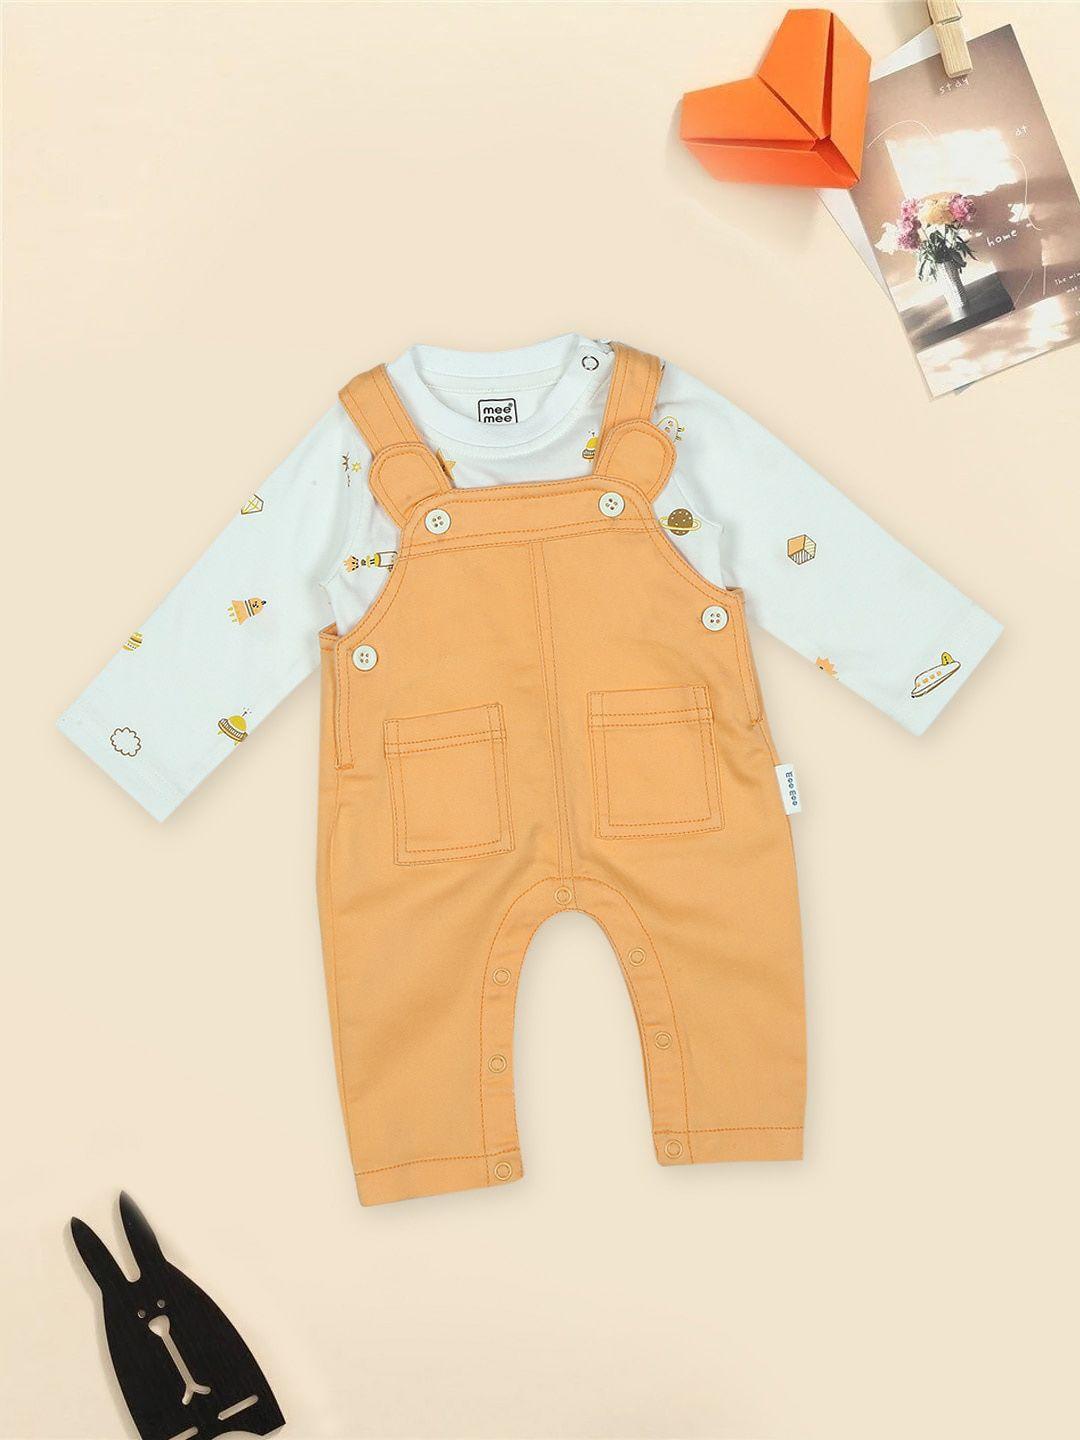 meemee infants dungaree with space-printed t-shirt